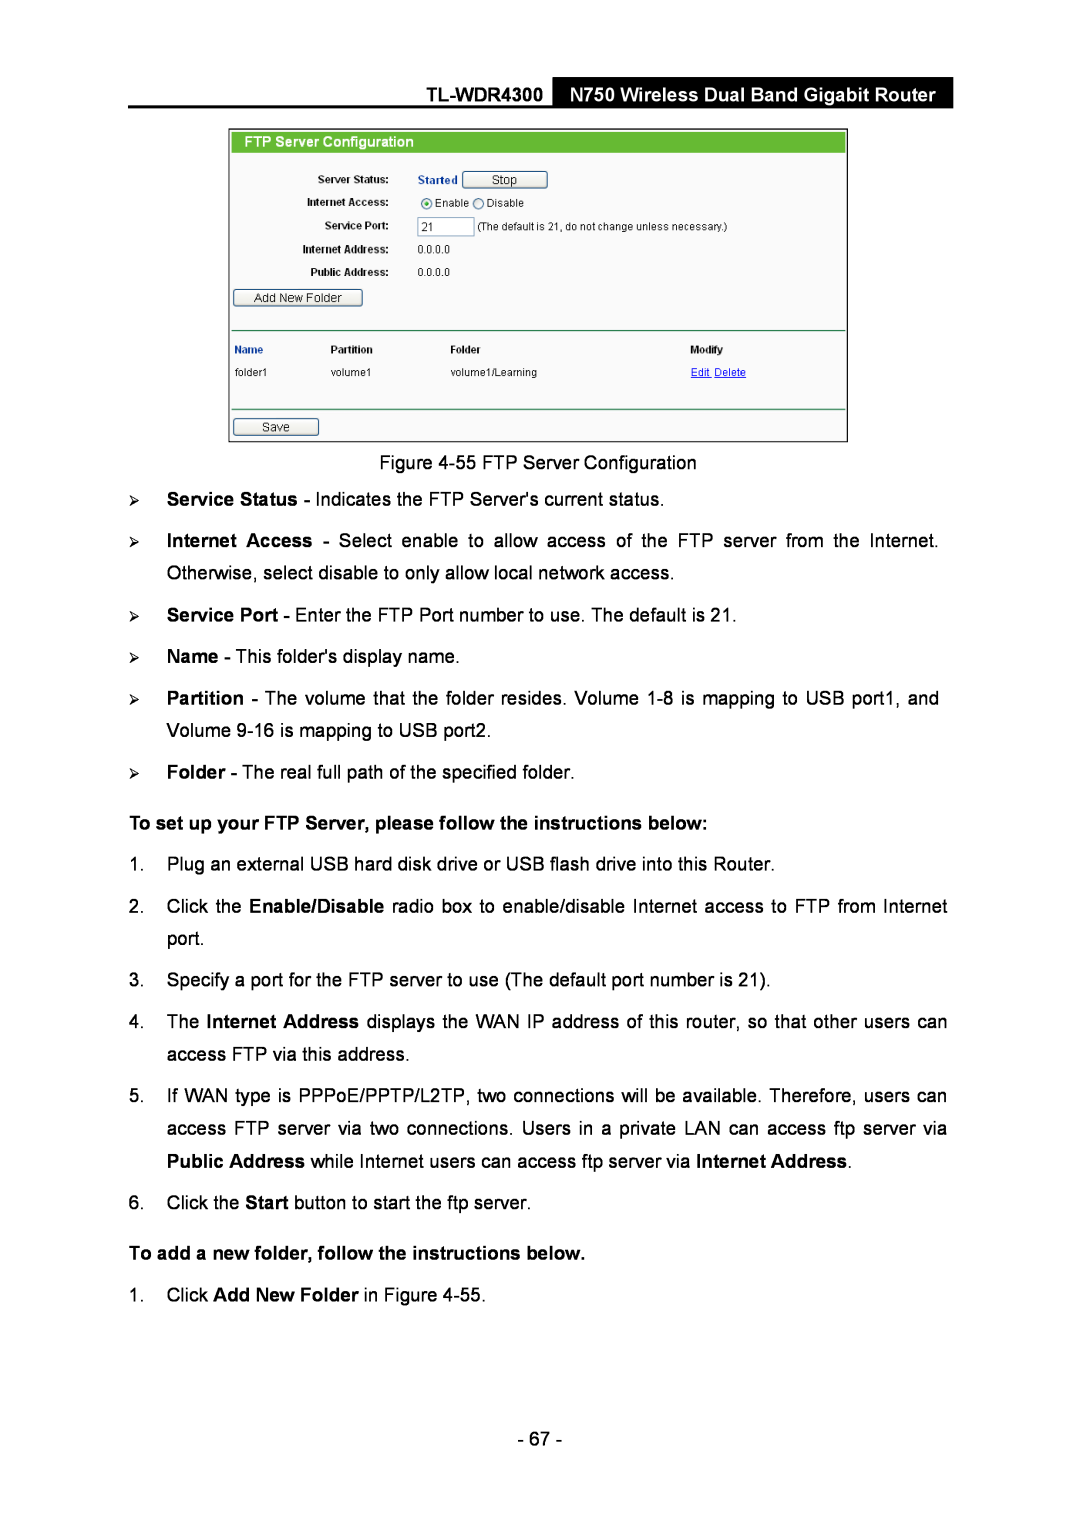 TP-Link TL-WDR4300 manual To set up your FTP Server, please follow the instructions below 